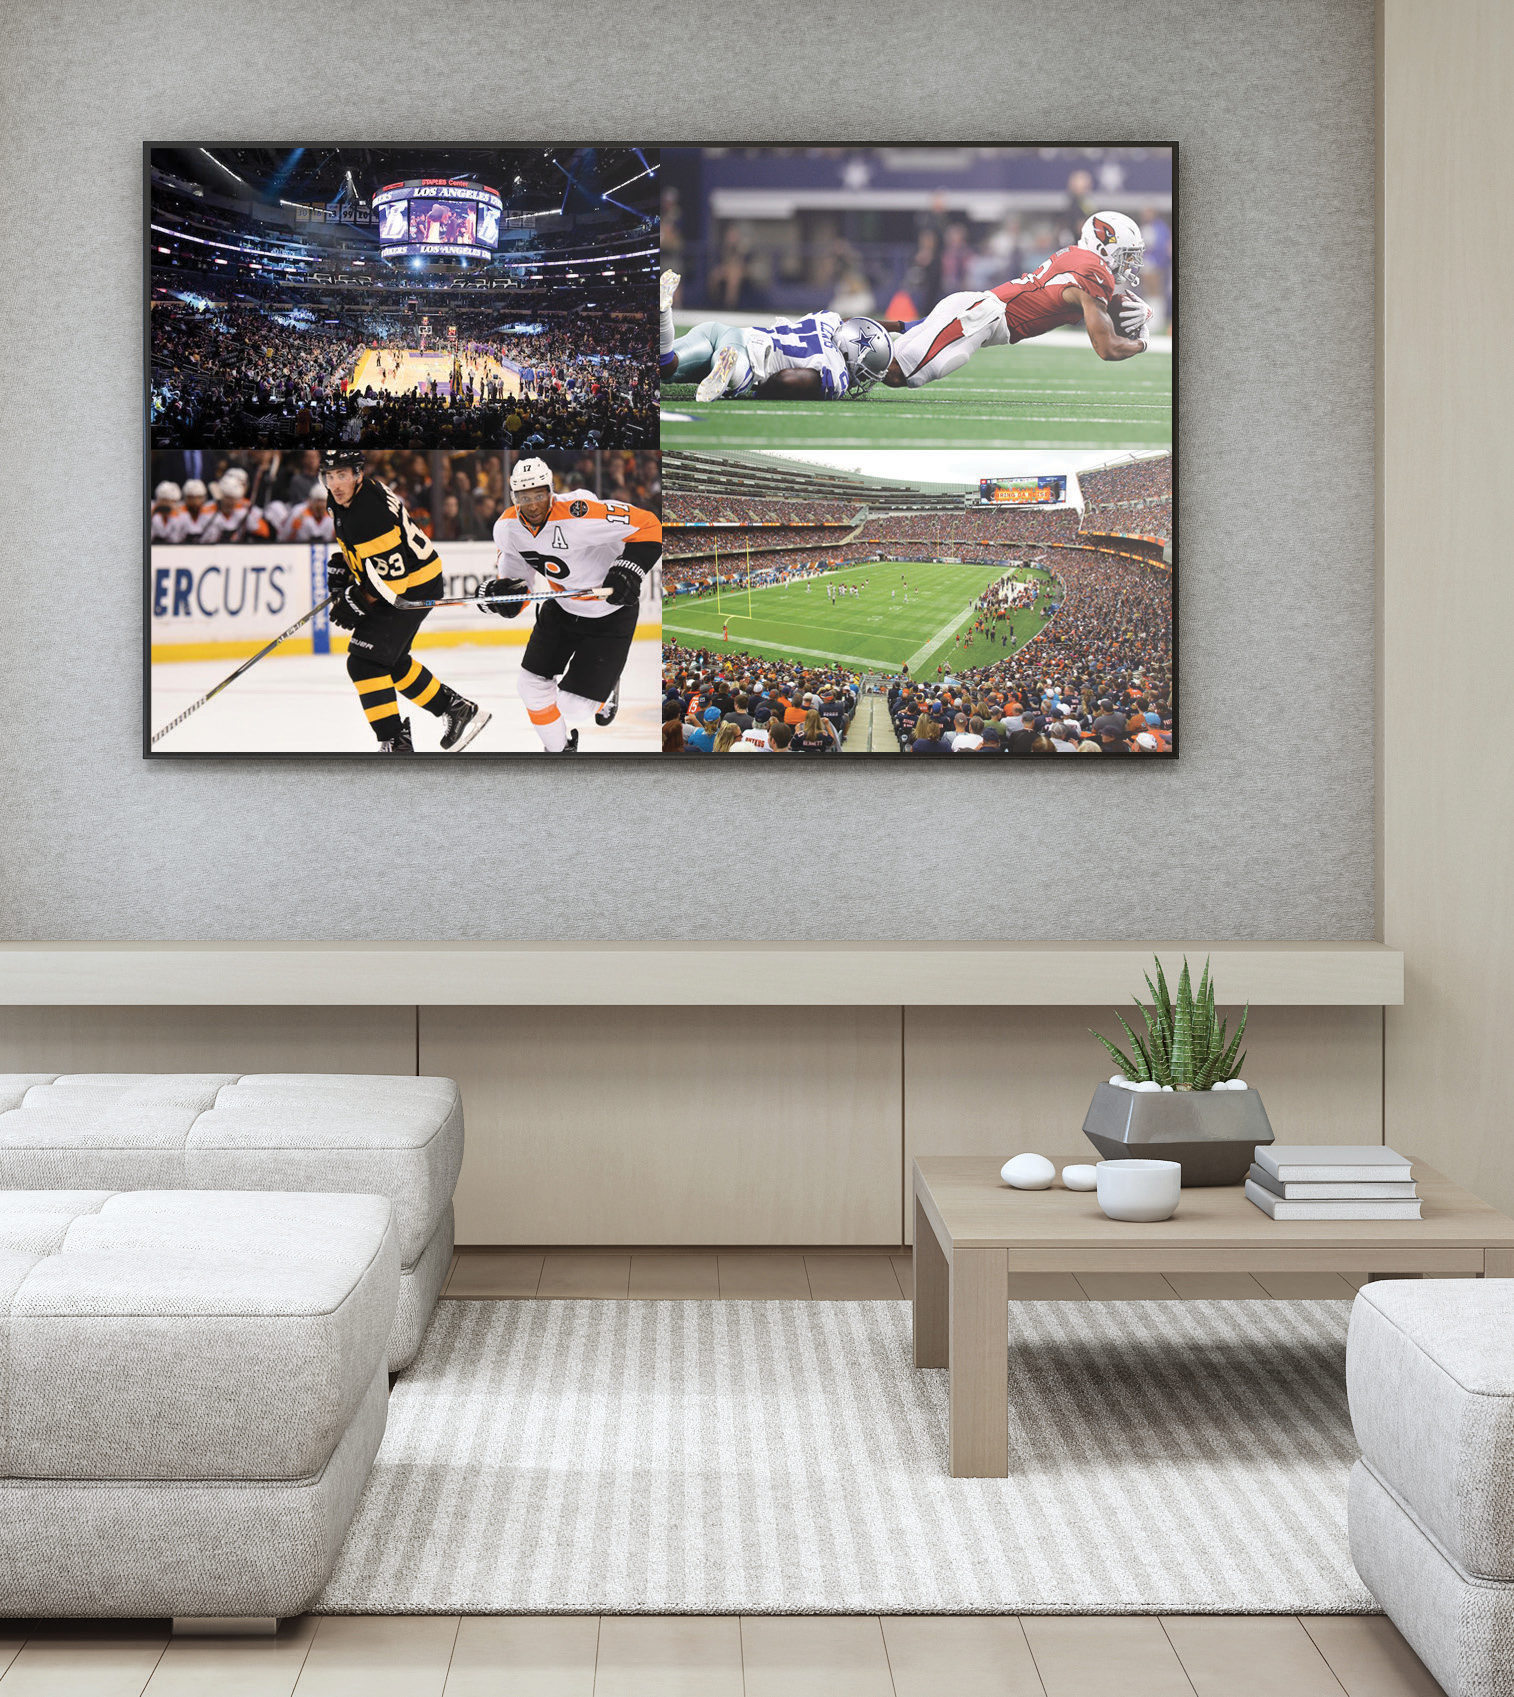 A collage of hockey images hangs on a wall in a living room